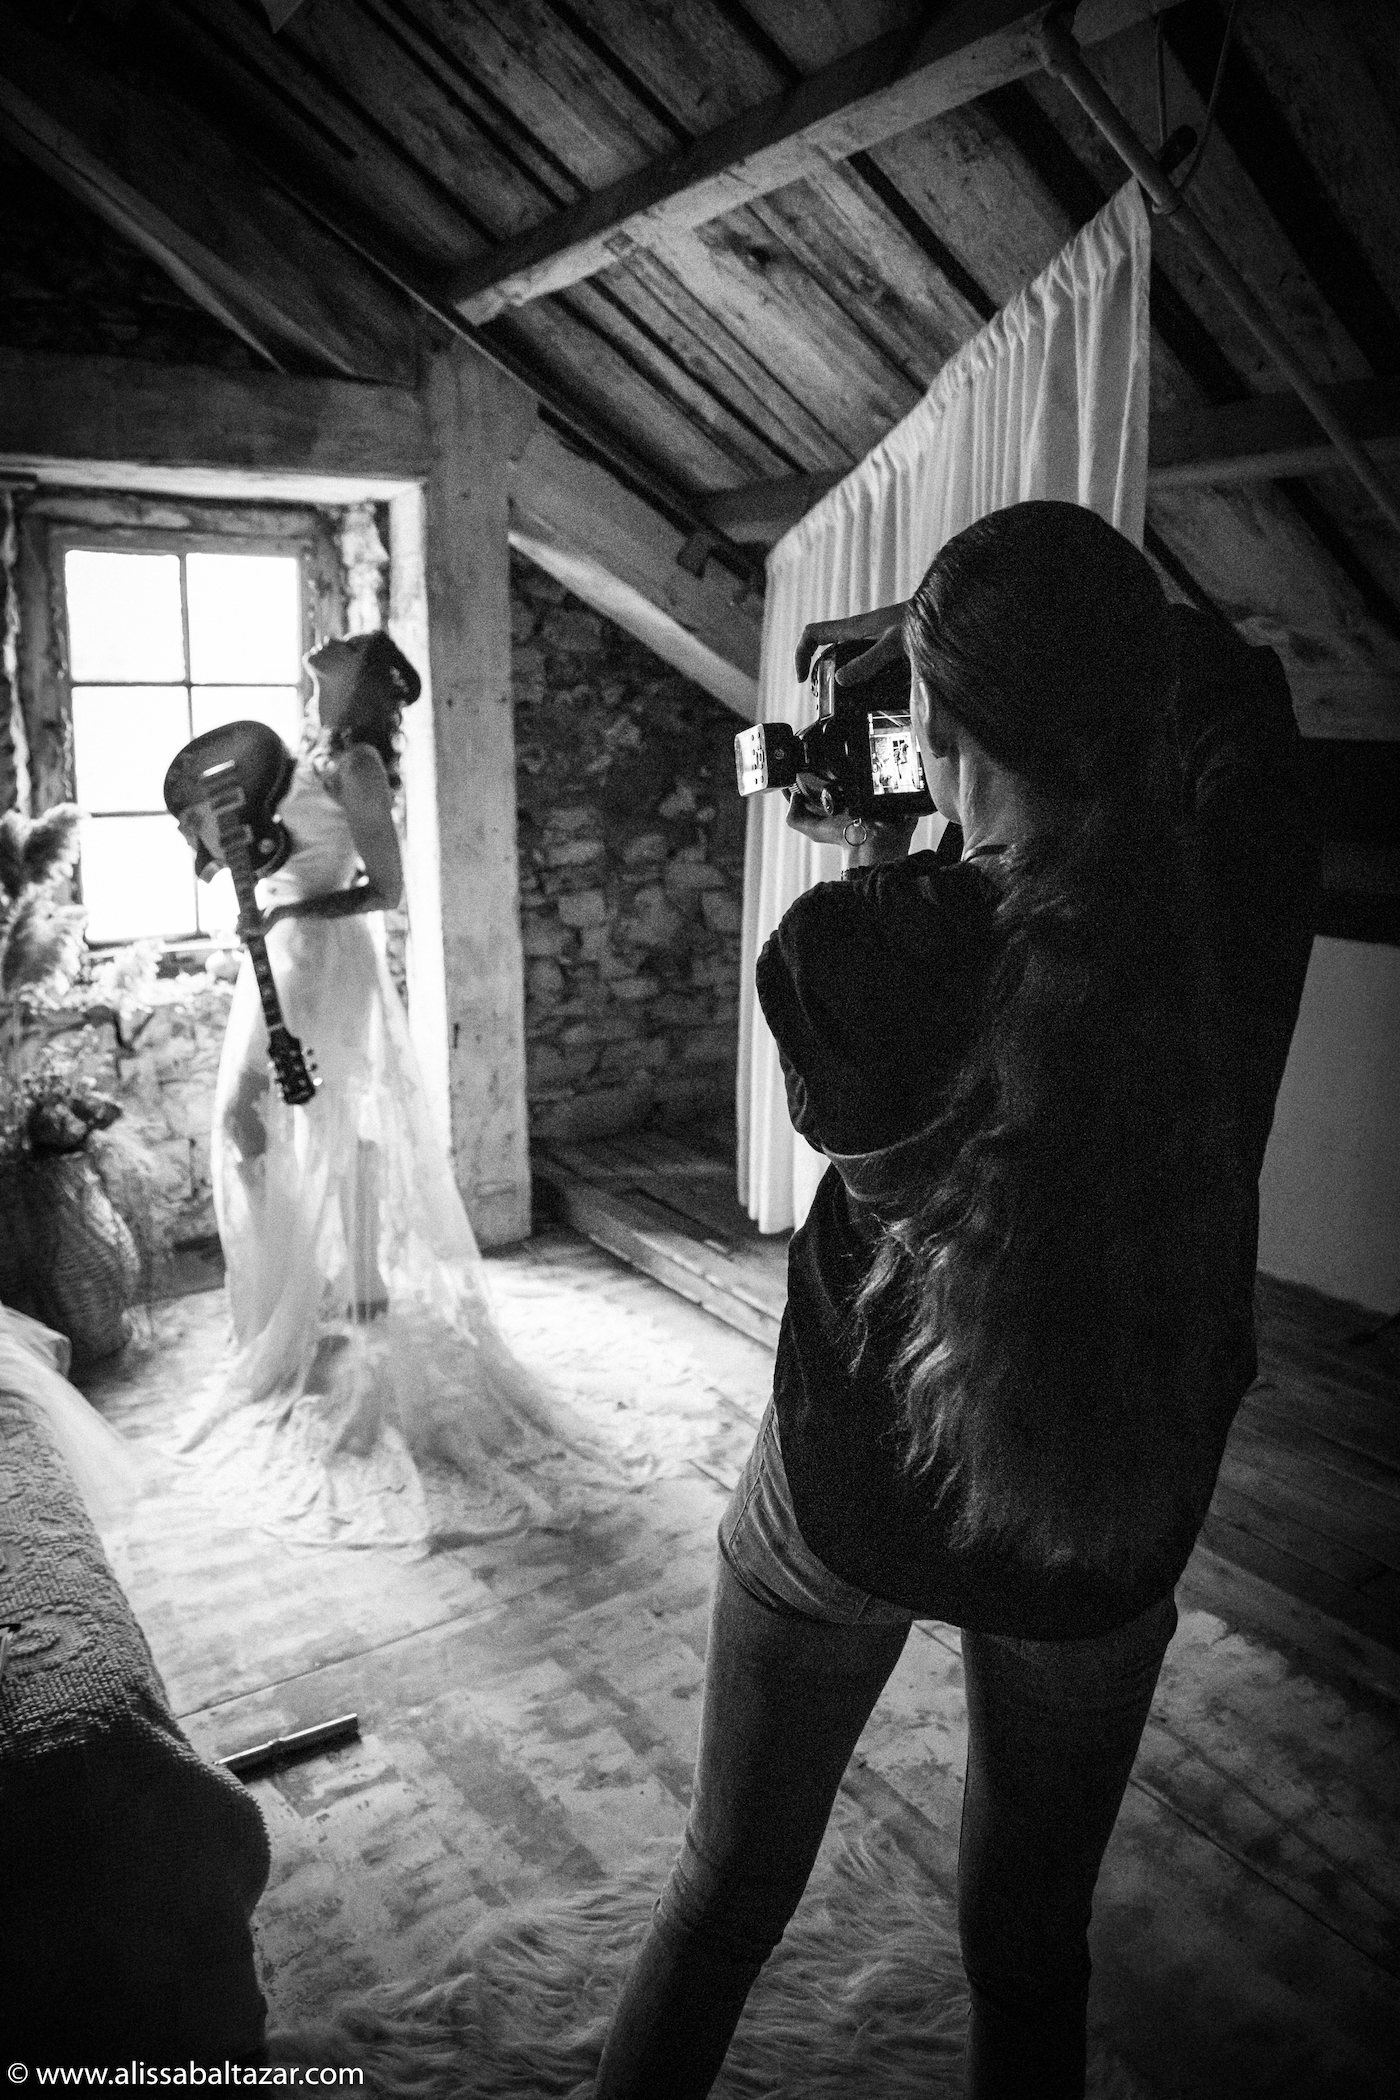 Looking from behind at Alissa Baltazar photographer as she takes a rock and roll wedding picture featuring a bride with a guitar in an antique backlit window